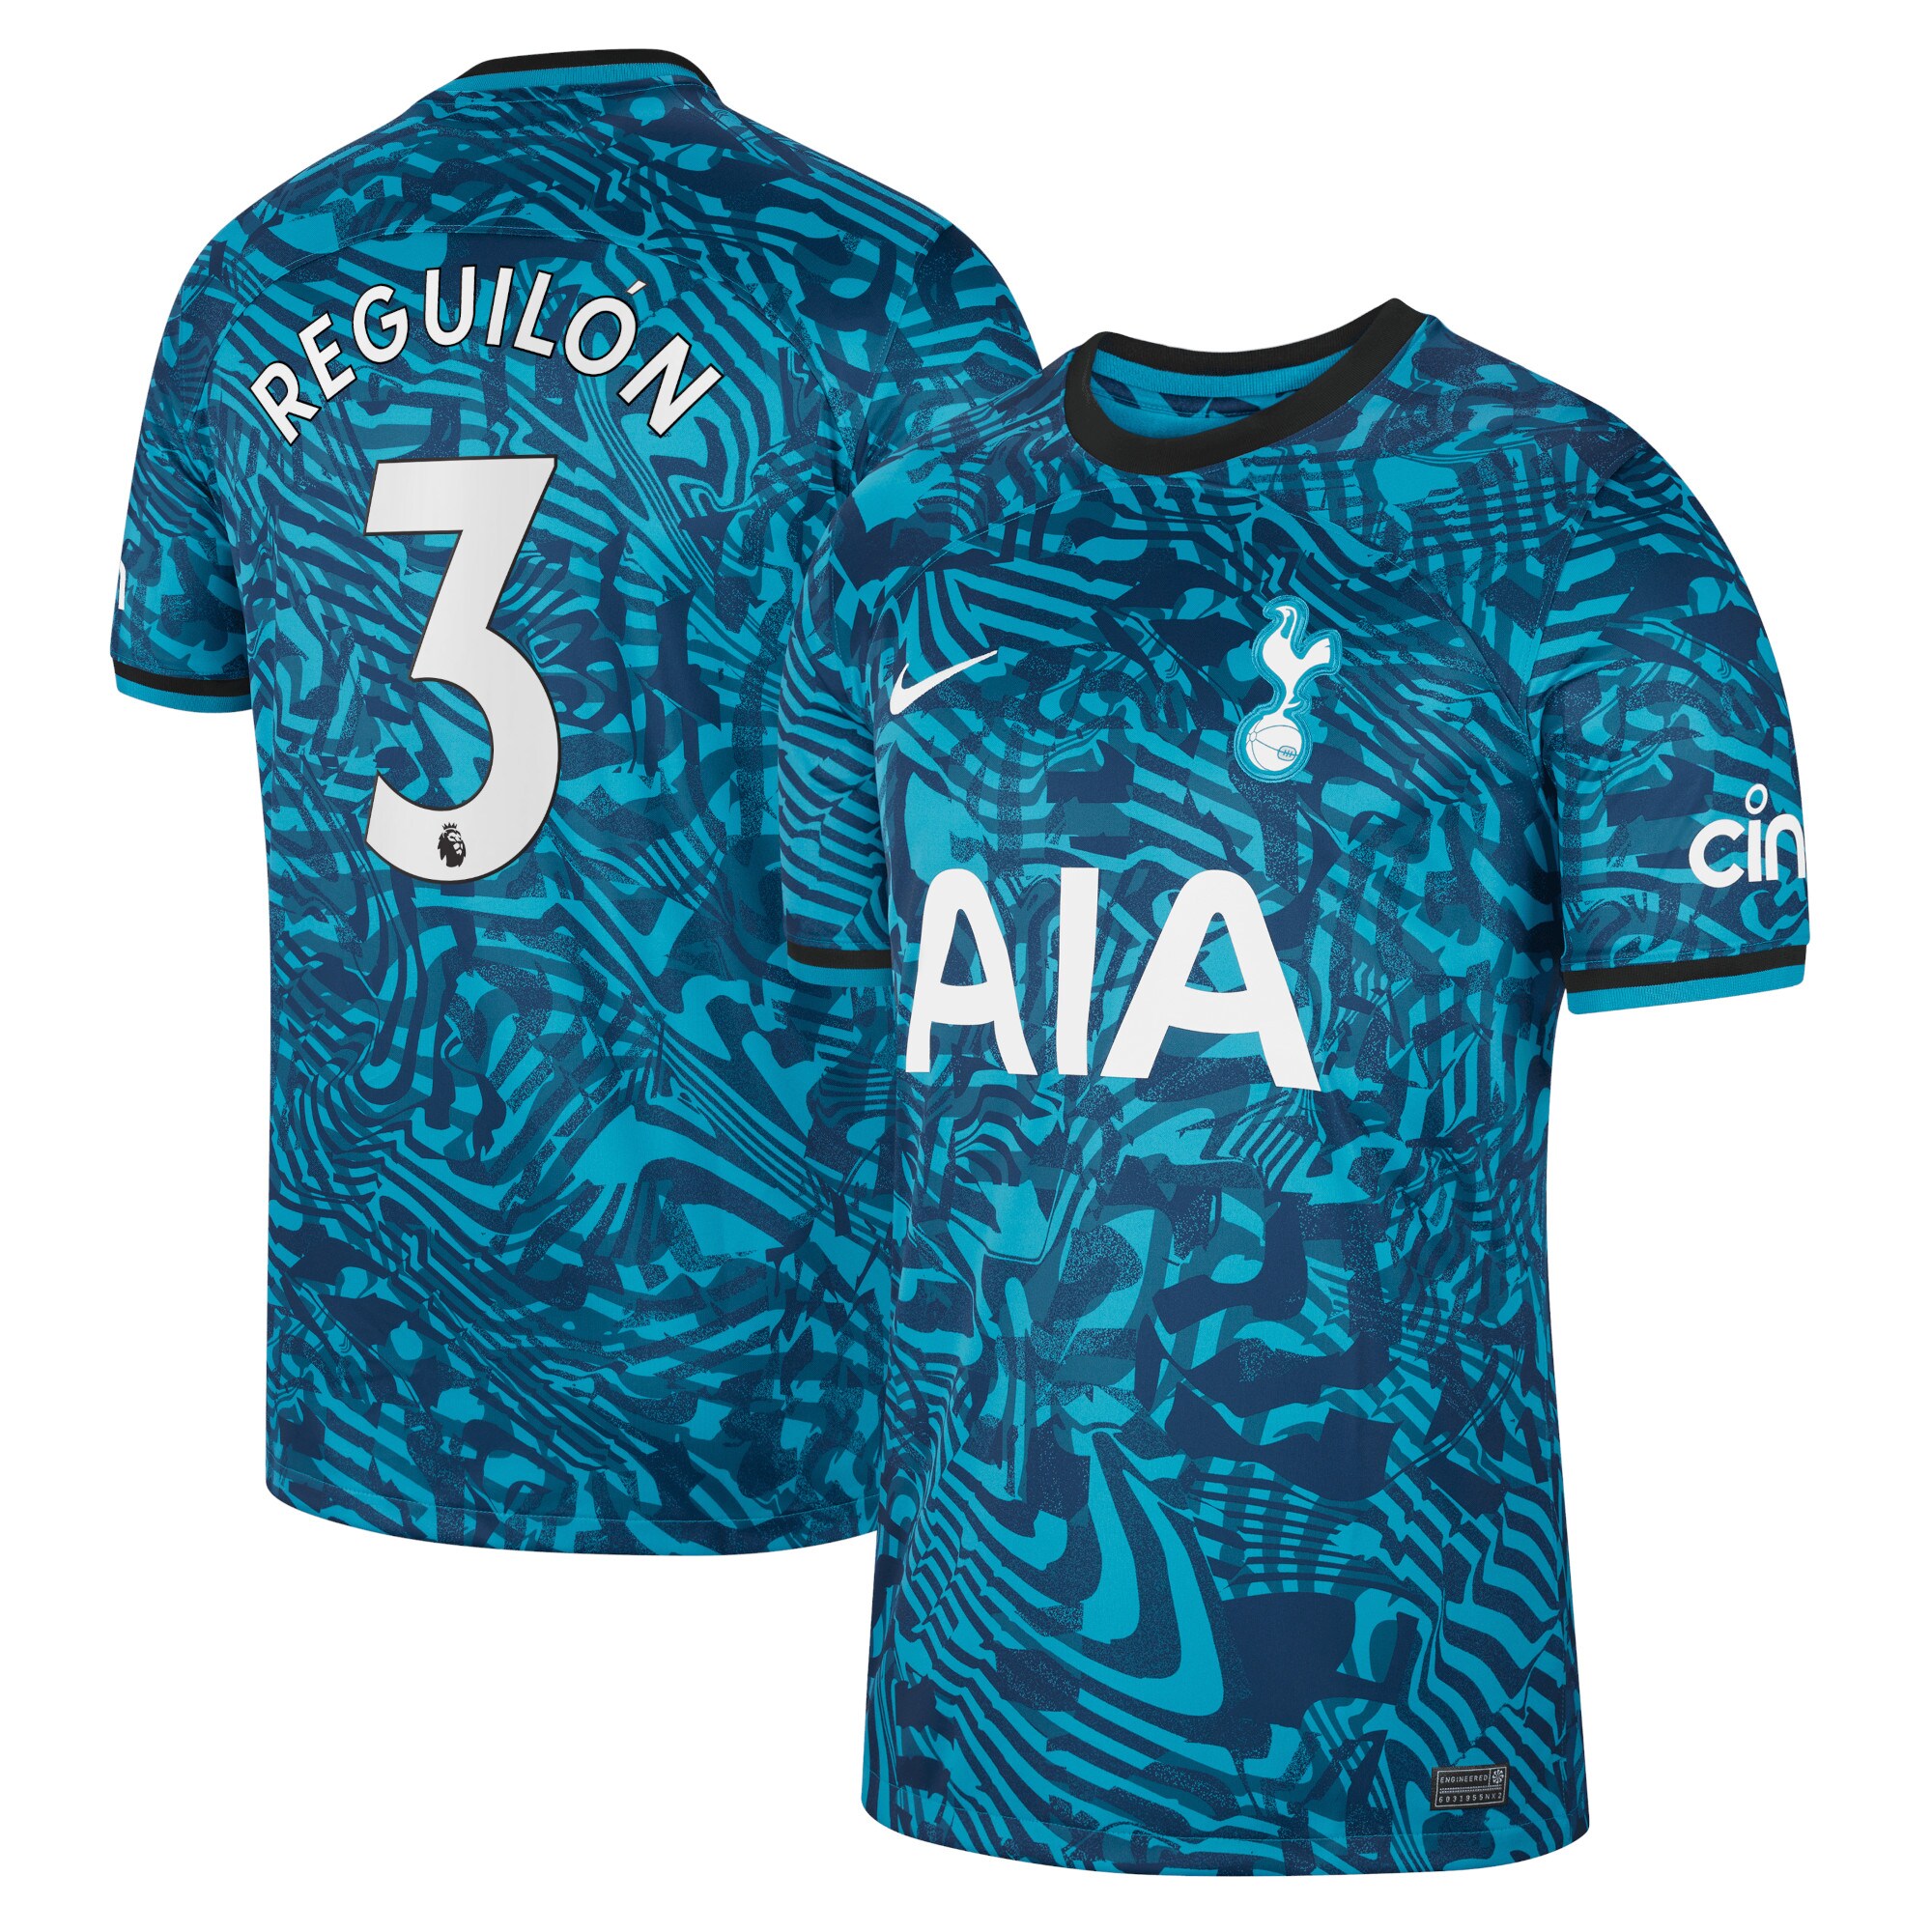 Tottenham Hotspur third kit 2022/23 OUT NOW: Here's where you can buy